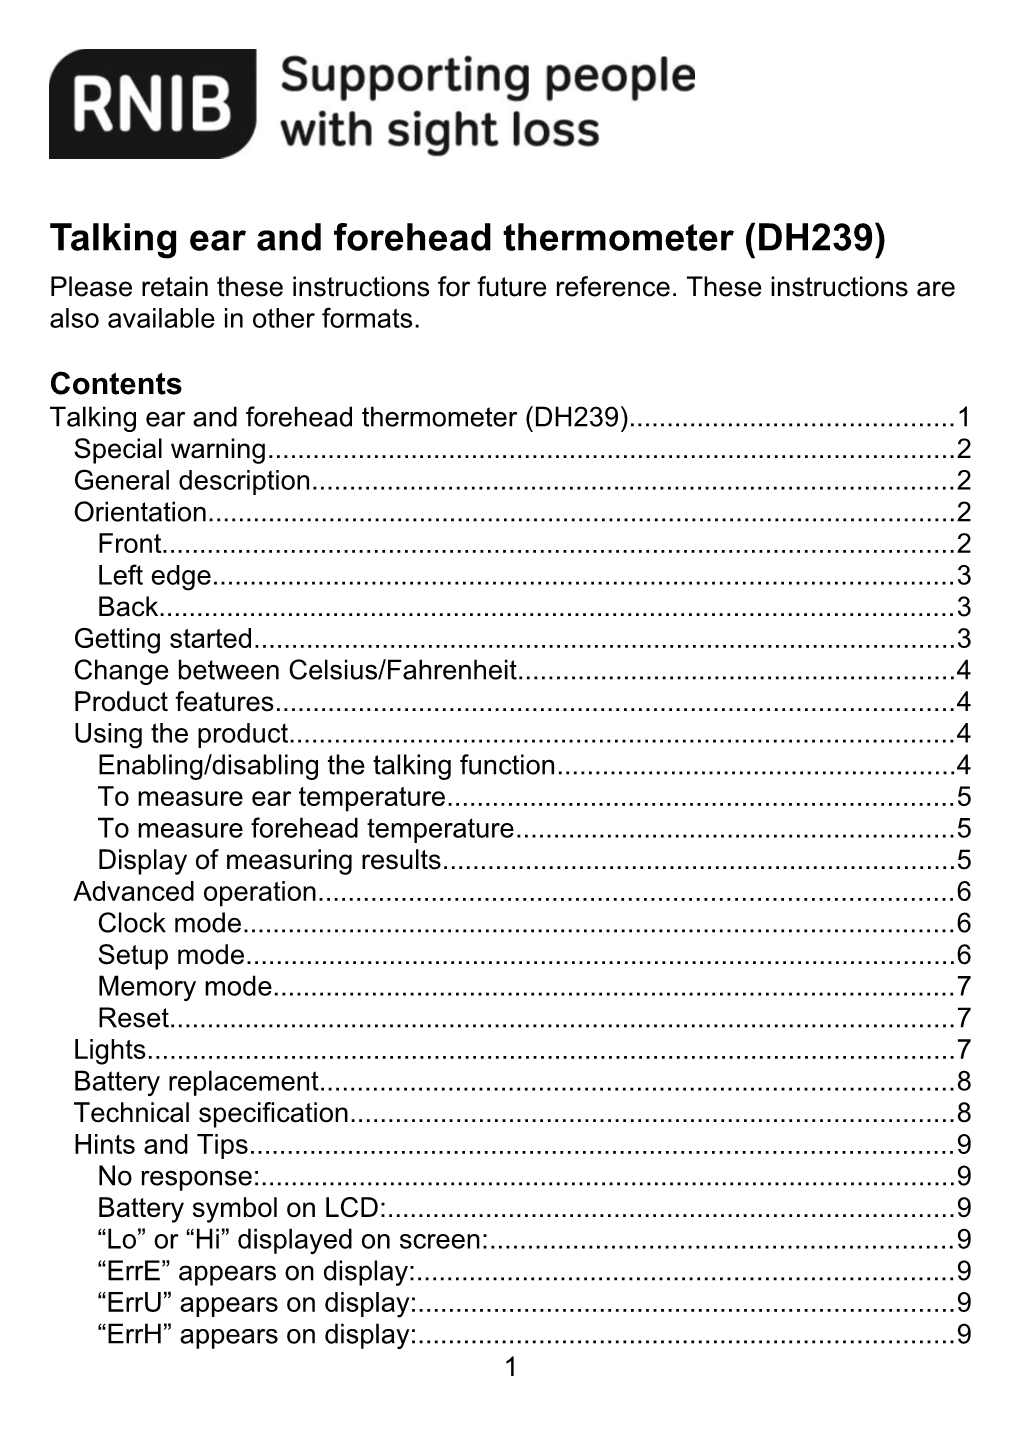 Talking Ear and Forehead Thermometer (DH239)